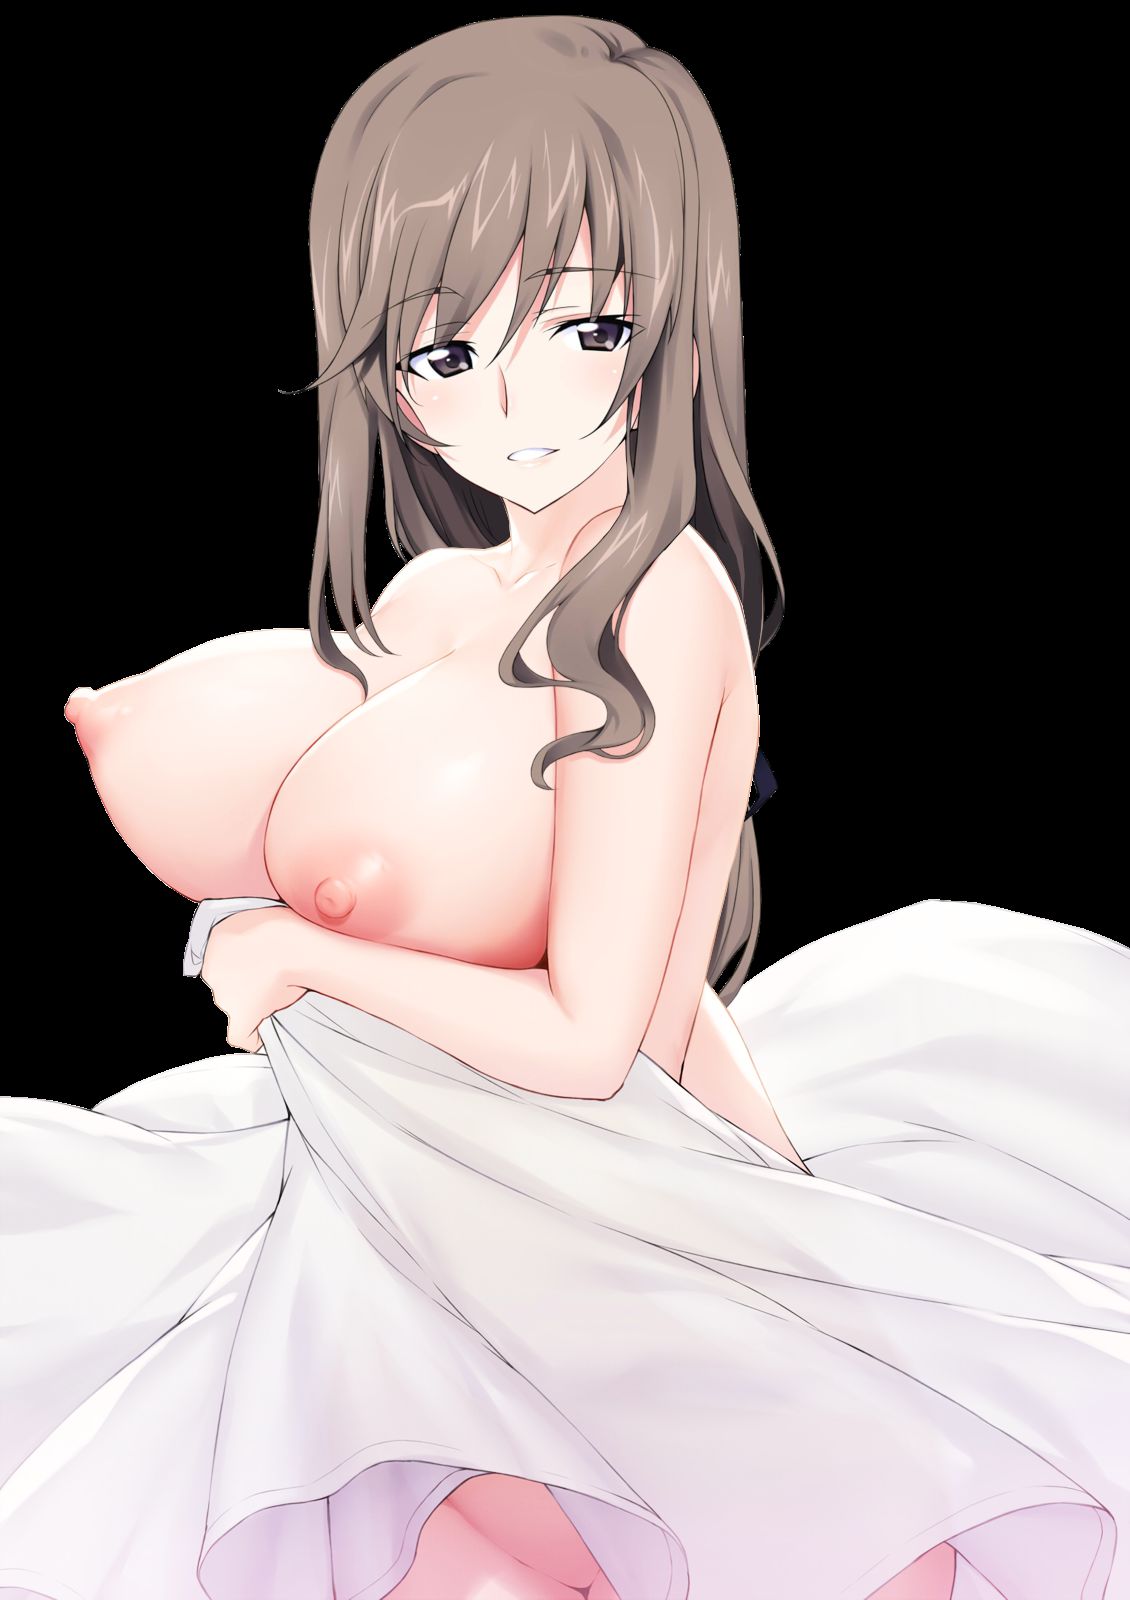 【Human Wife】Secondary erotic image of Mama character Part 67 35